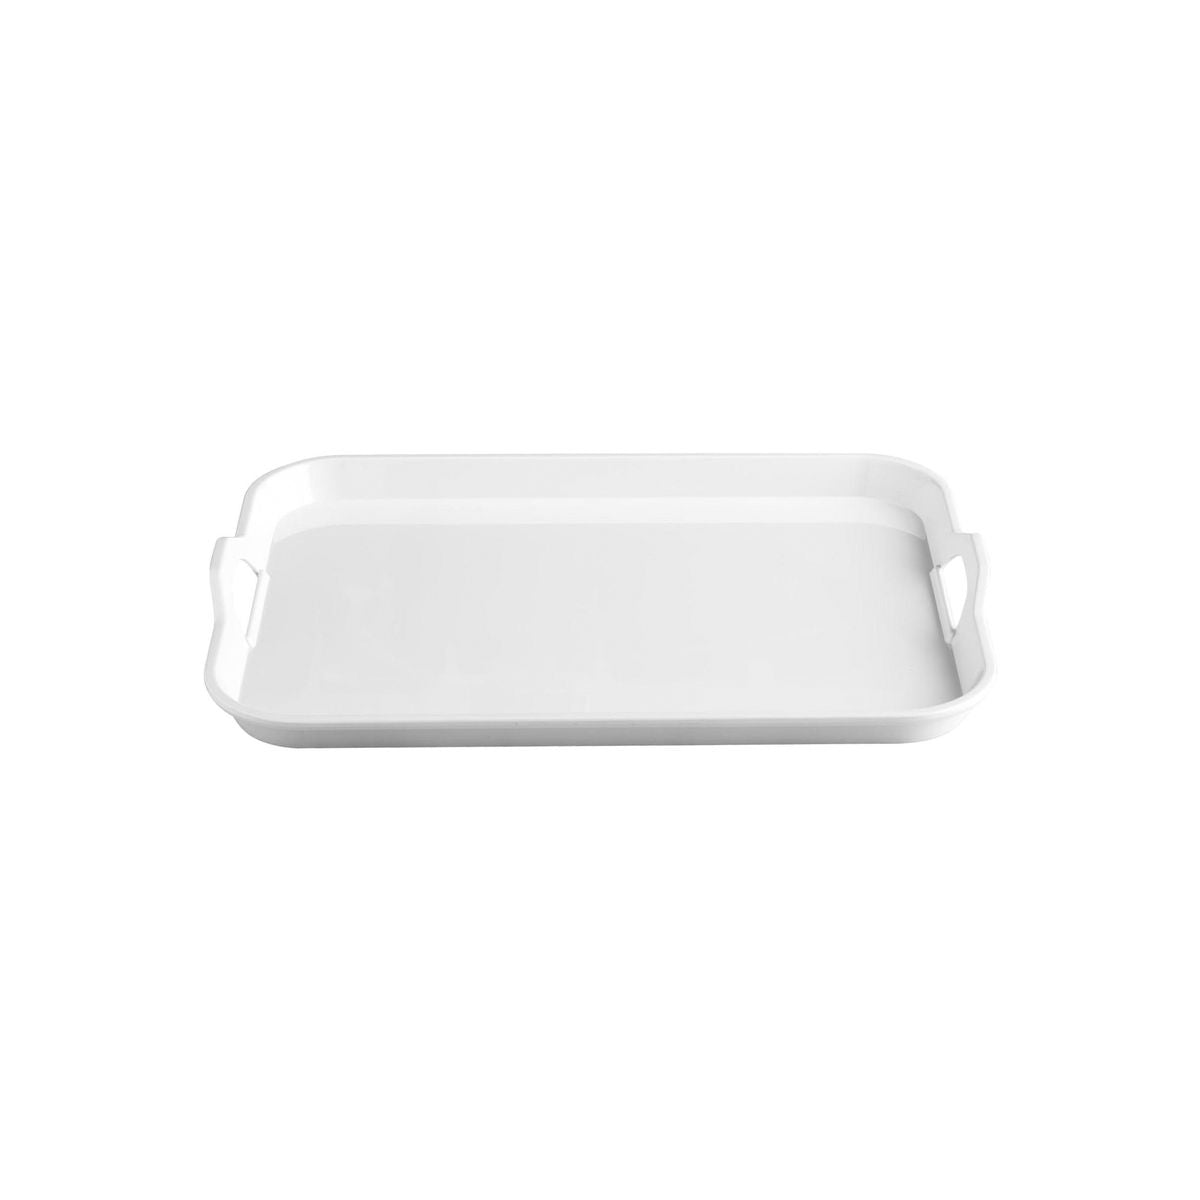 49312 Superware White Serving Tray with 2 Handles 530x370mm Tomkin Australia Hospitality Supplies